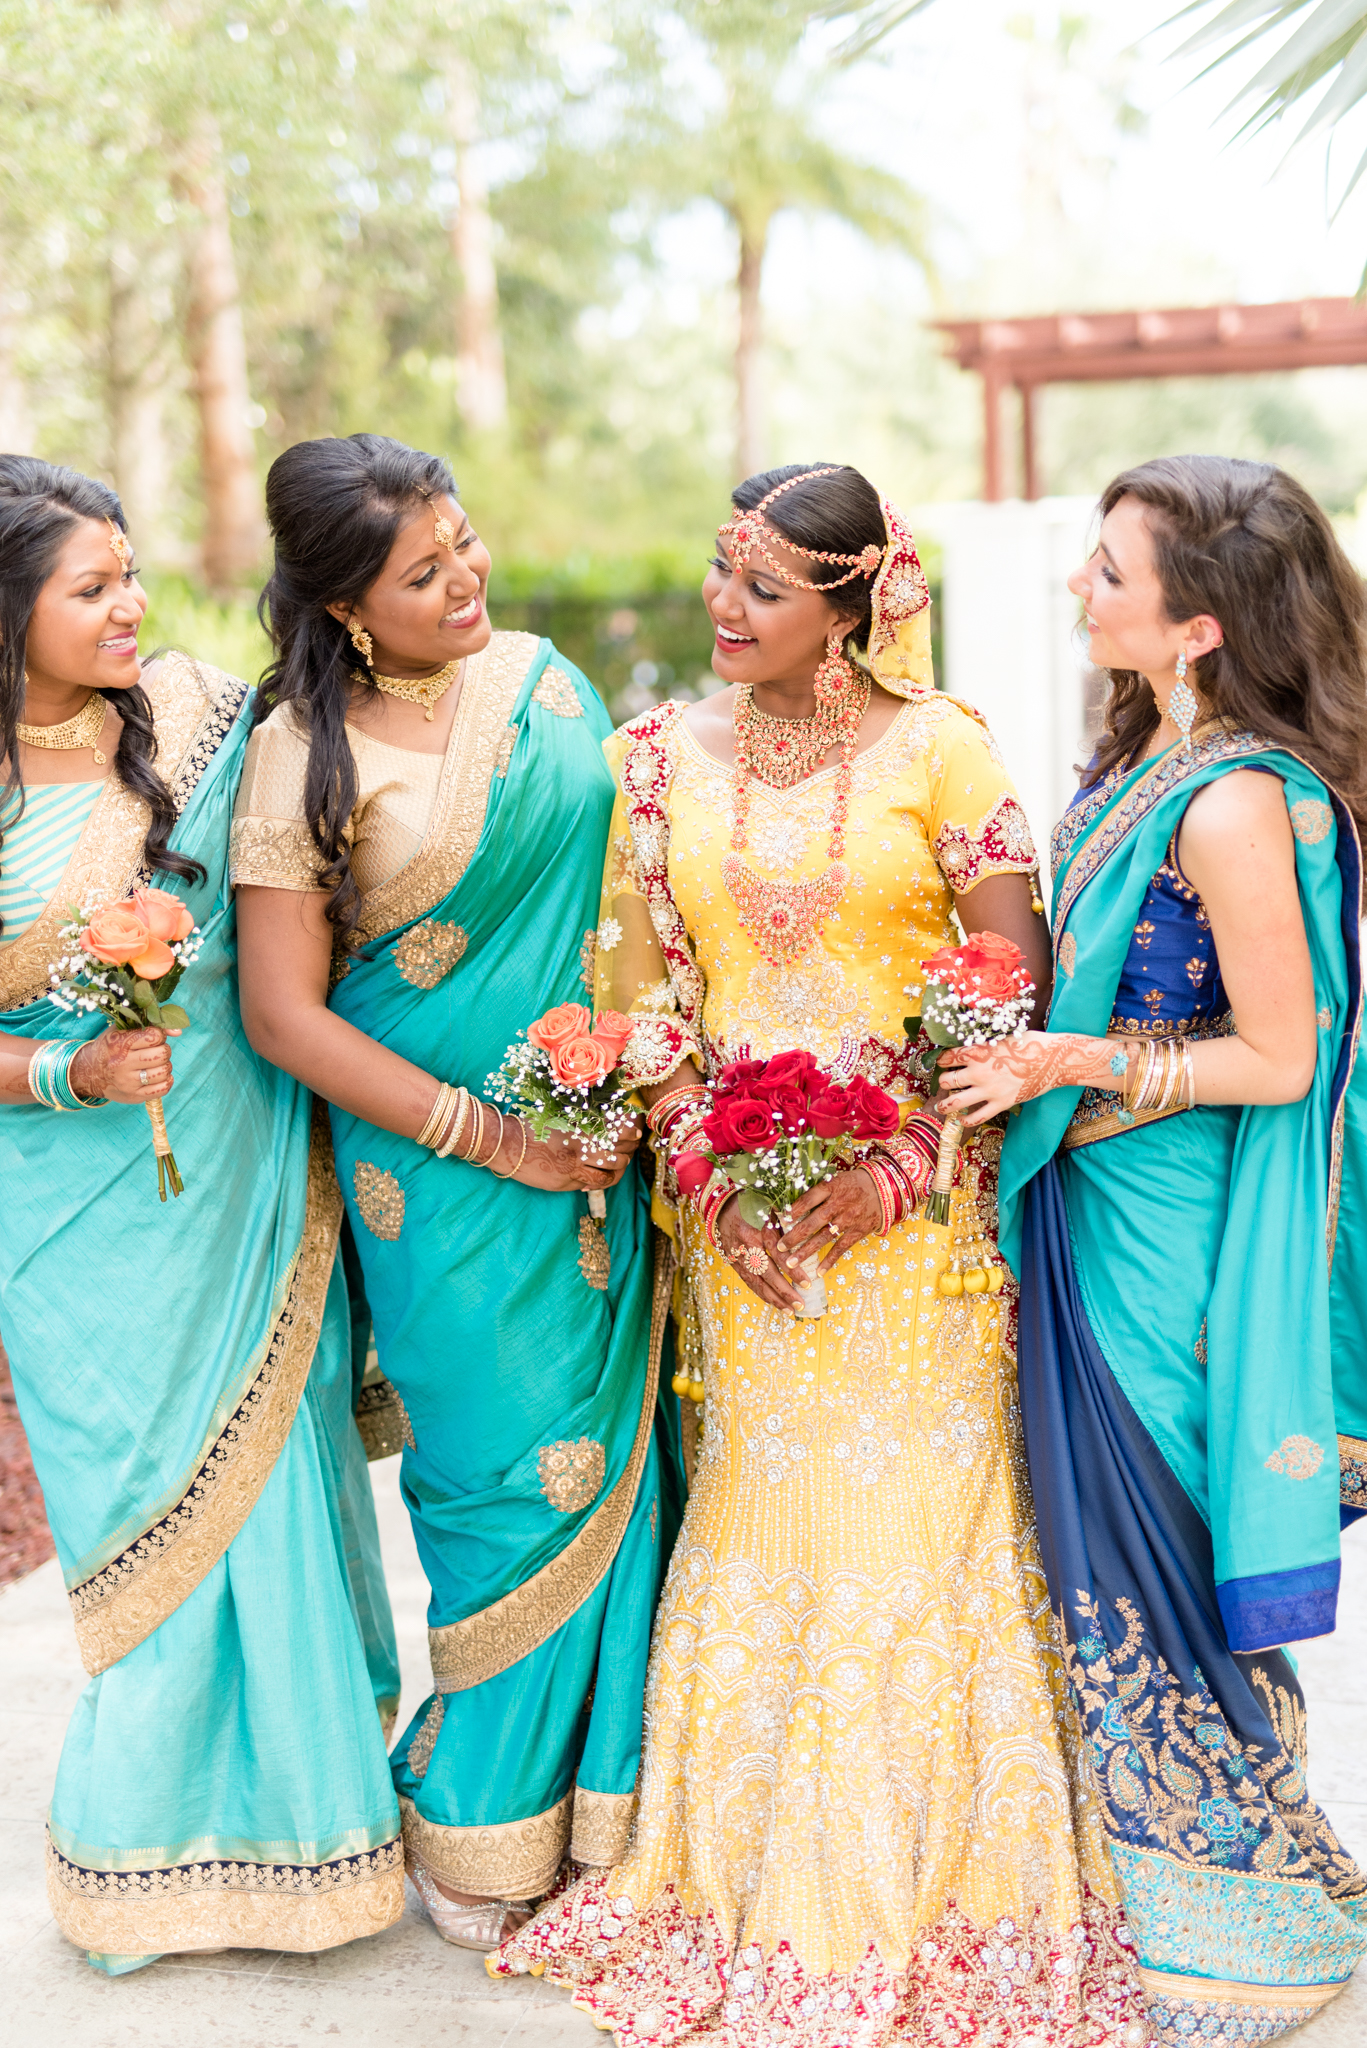 Bride laughs with her bridal party.